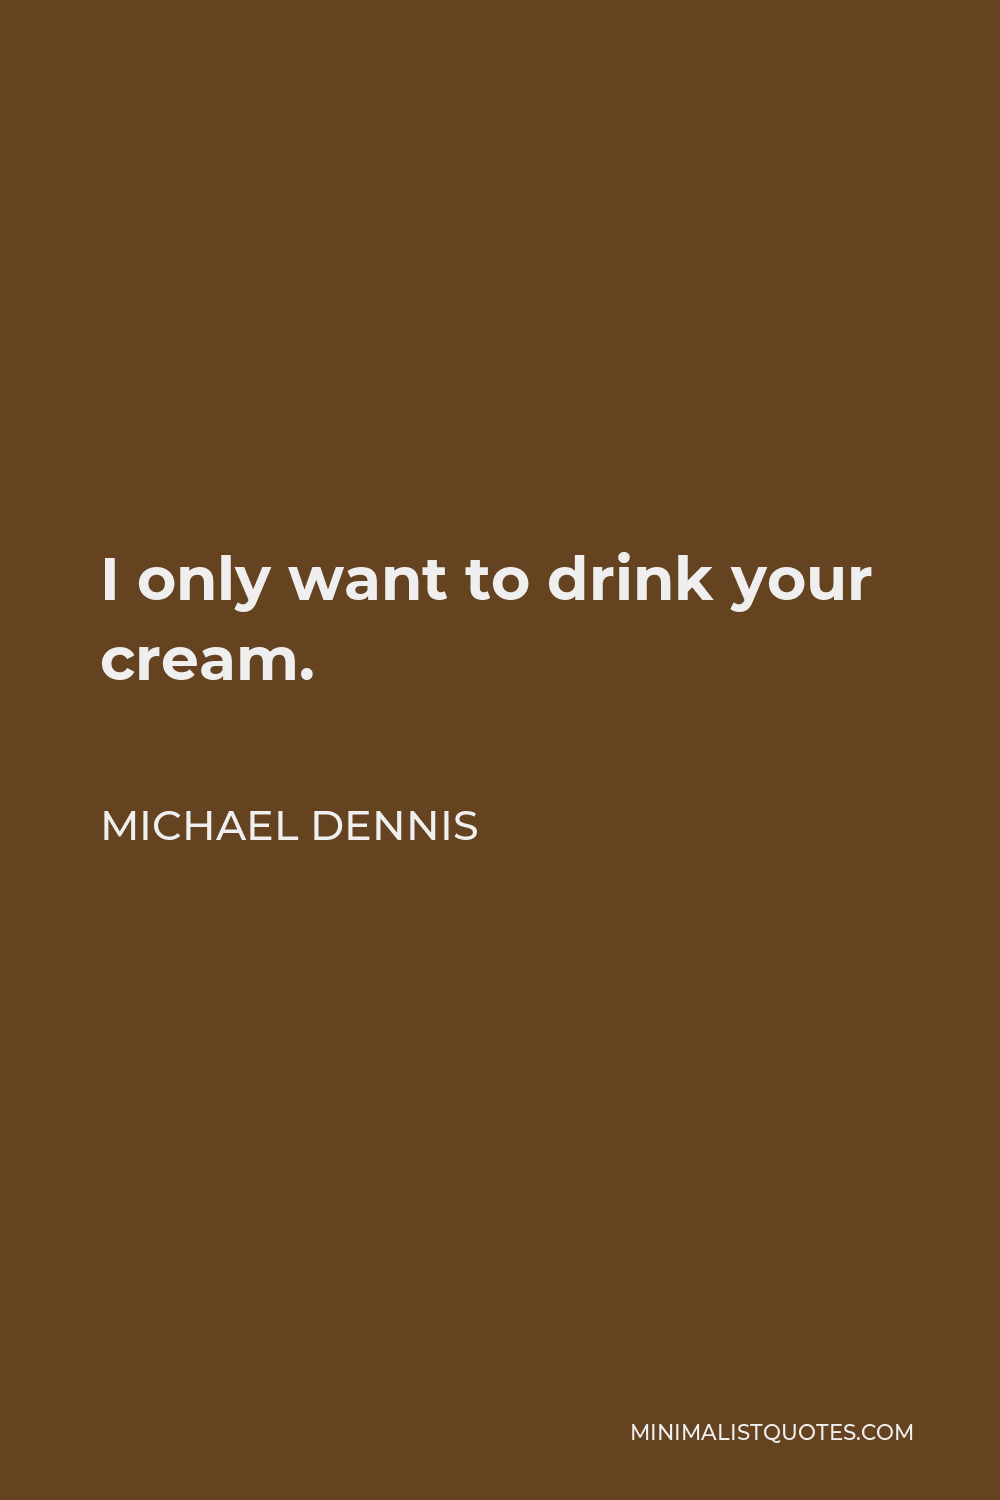 Michael Dennis Quote - I only want to drink your cream.